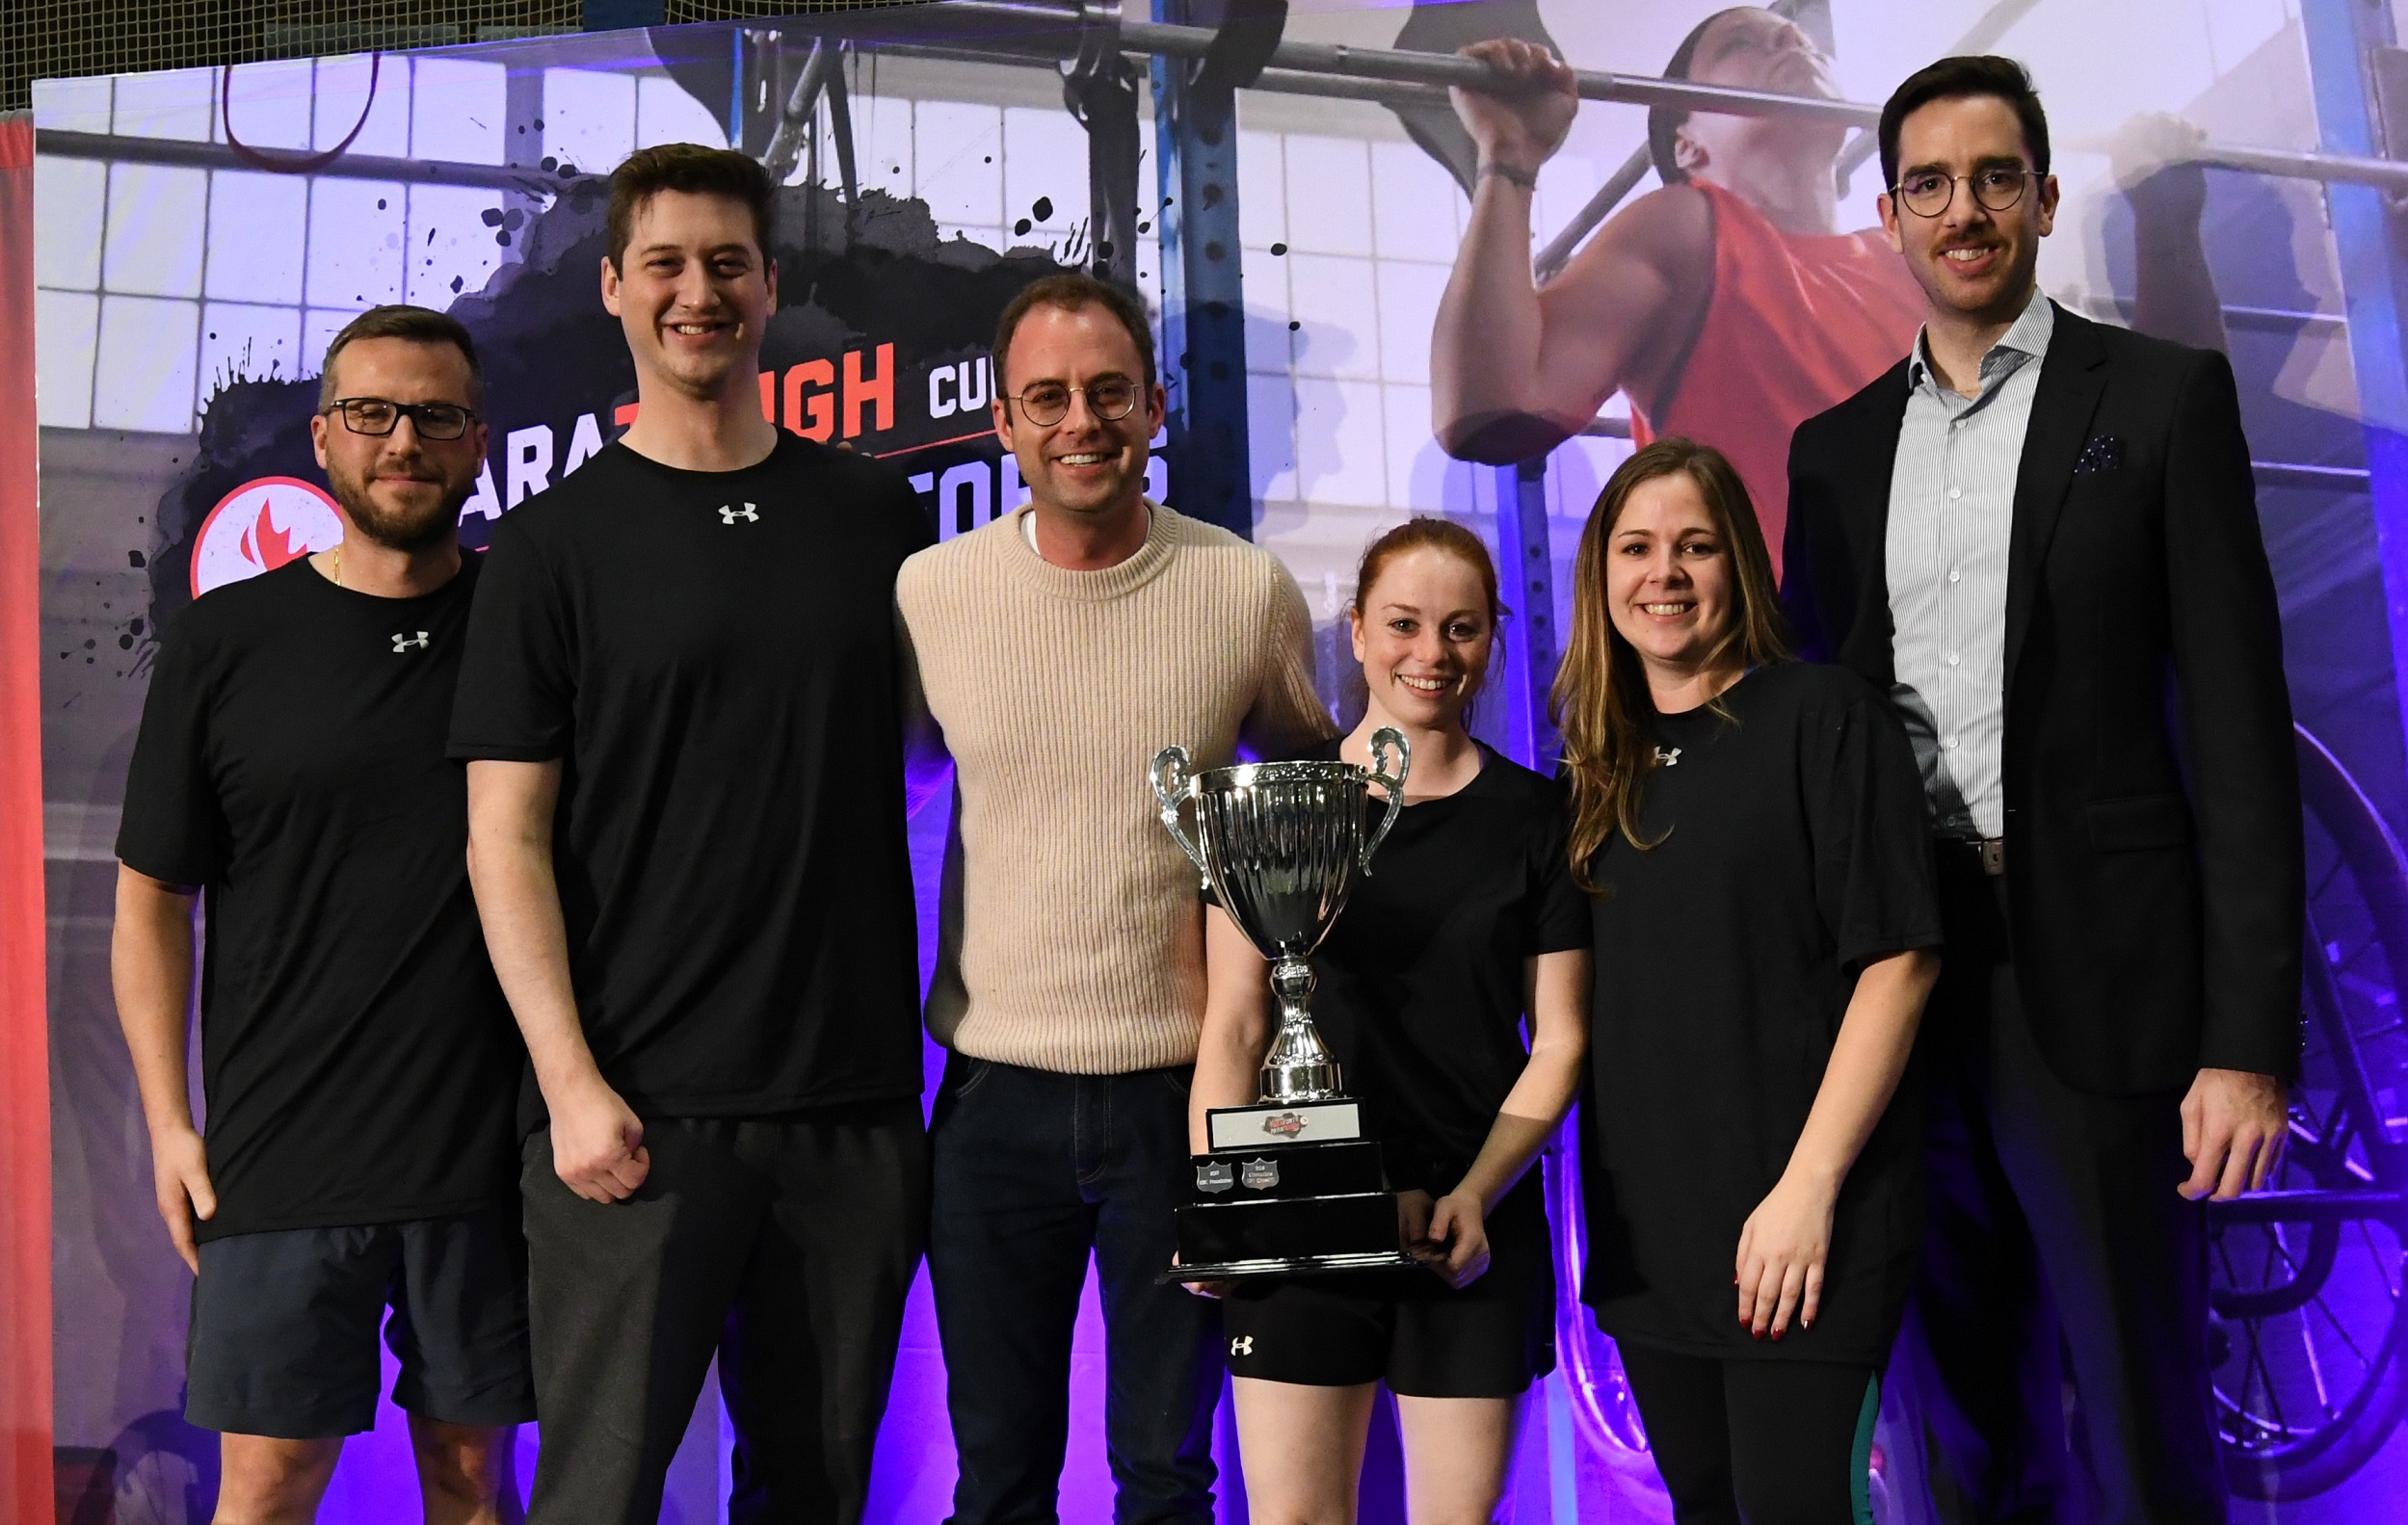 Team Fasken 2 with the ParaTough Cup trophy in Montreal 2019. 